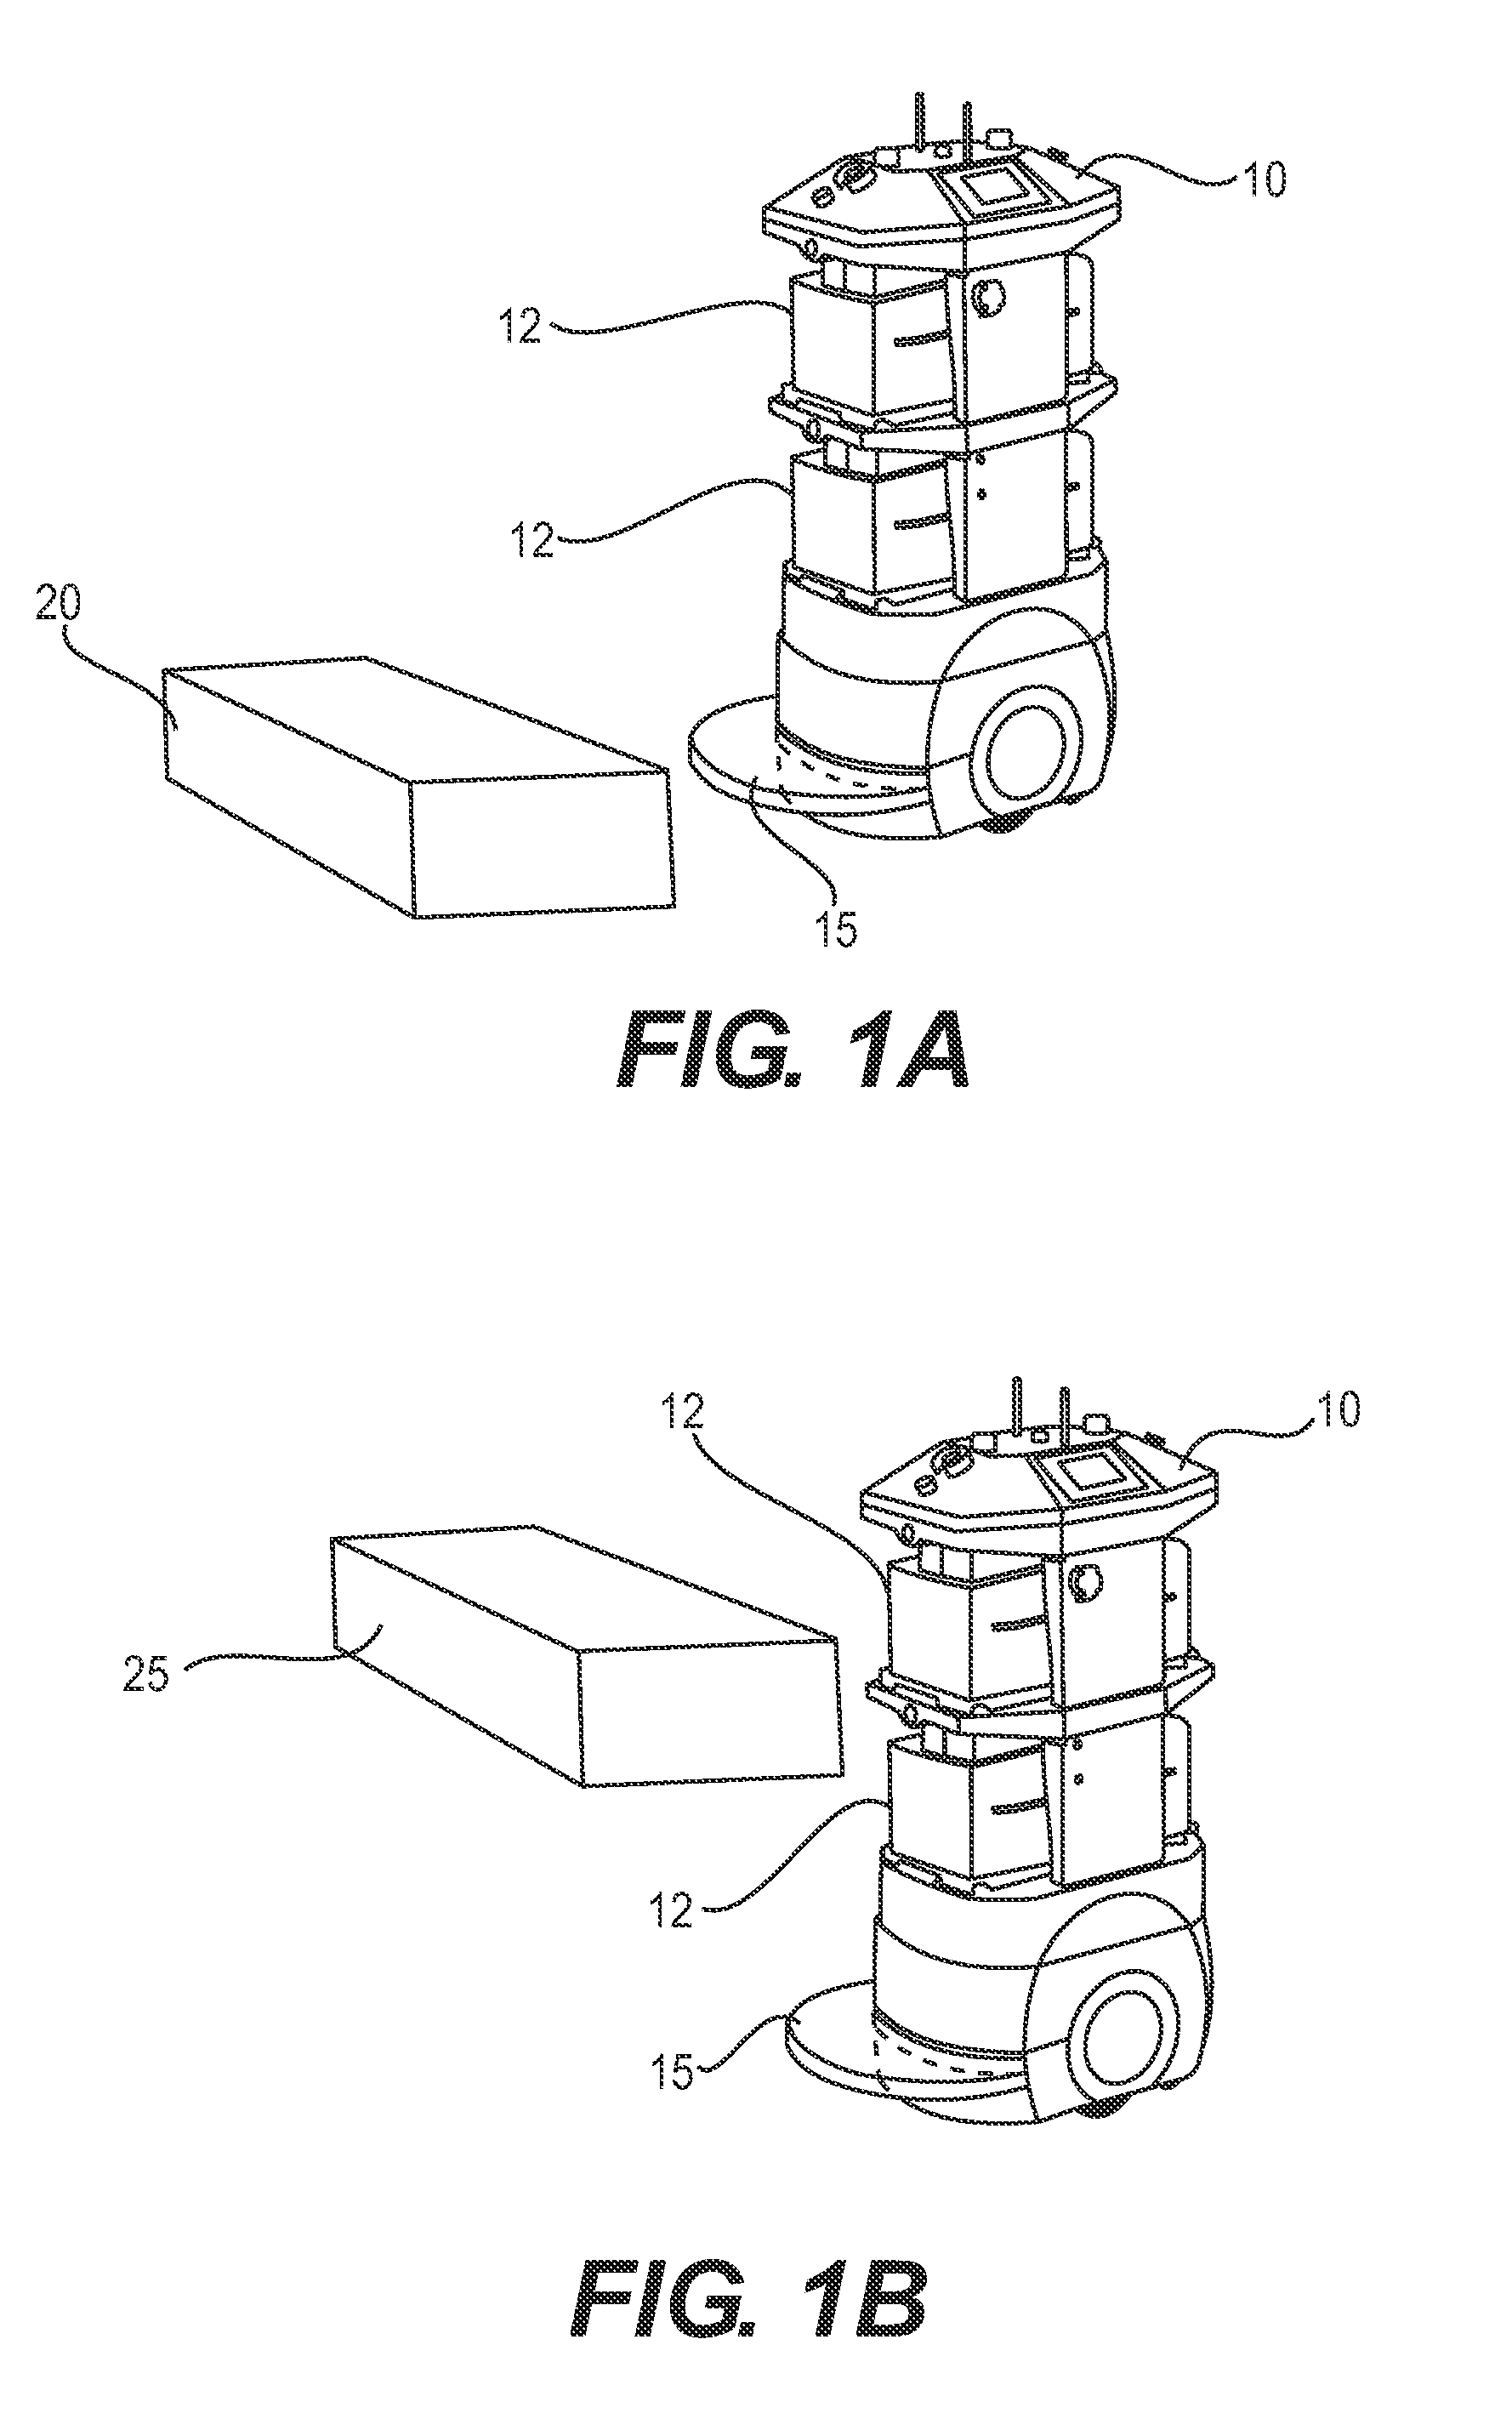 Positive and negative obstacle avoidance system and method for a mobile robot